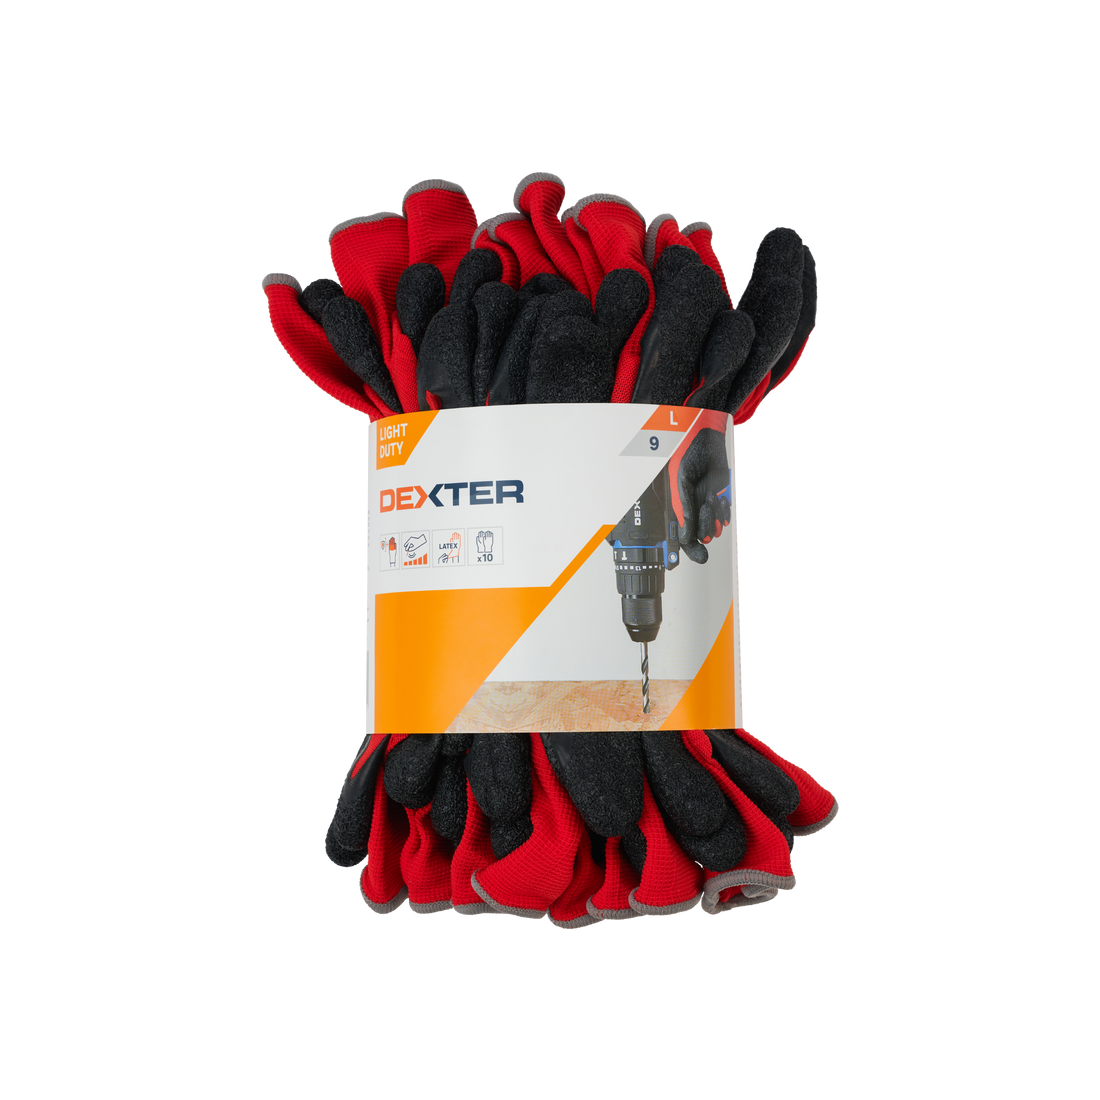 DEXTER UNIVERSAL WORK GLOVES NYLON AND LATEX COATED PALM SIZE 9L 10 PAIRS